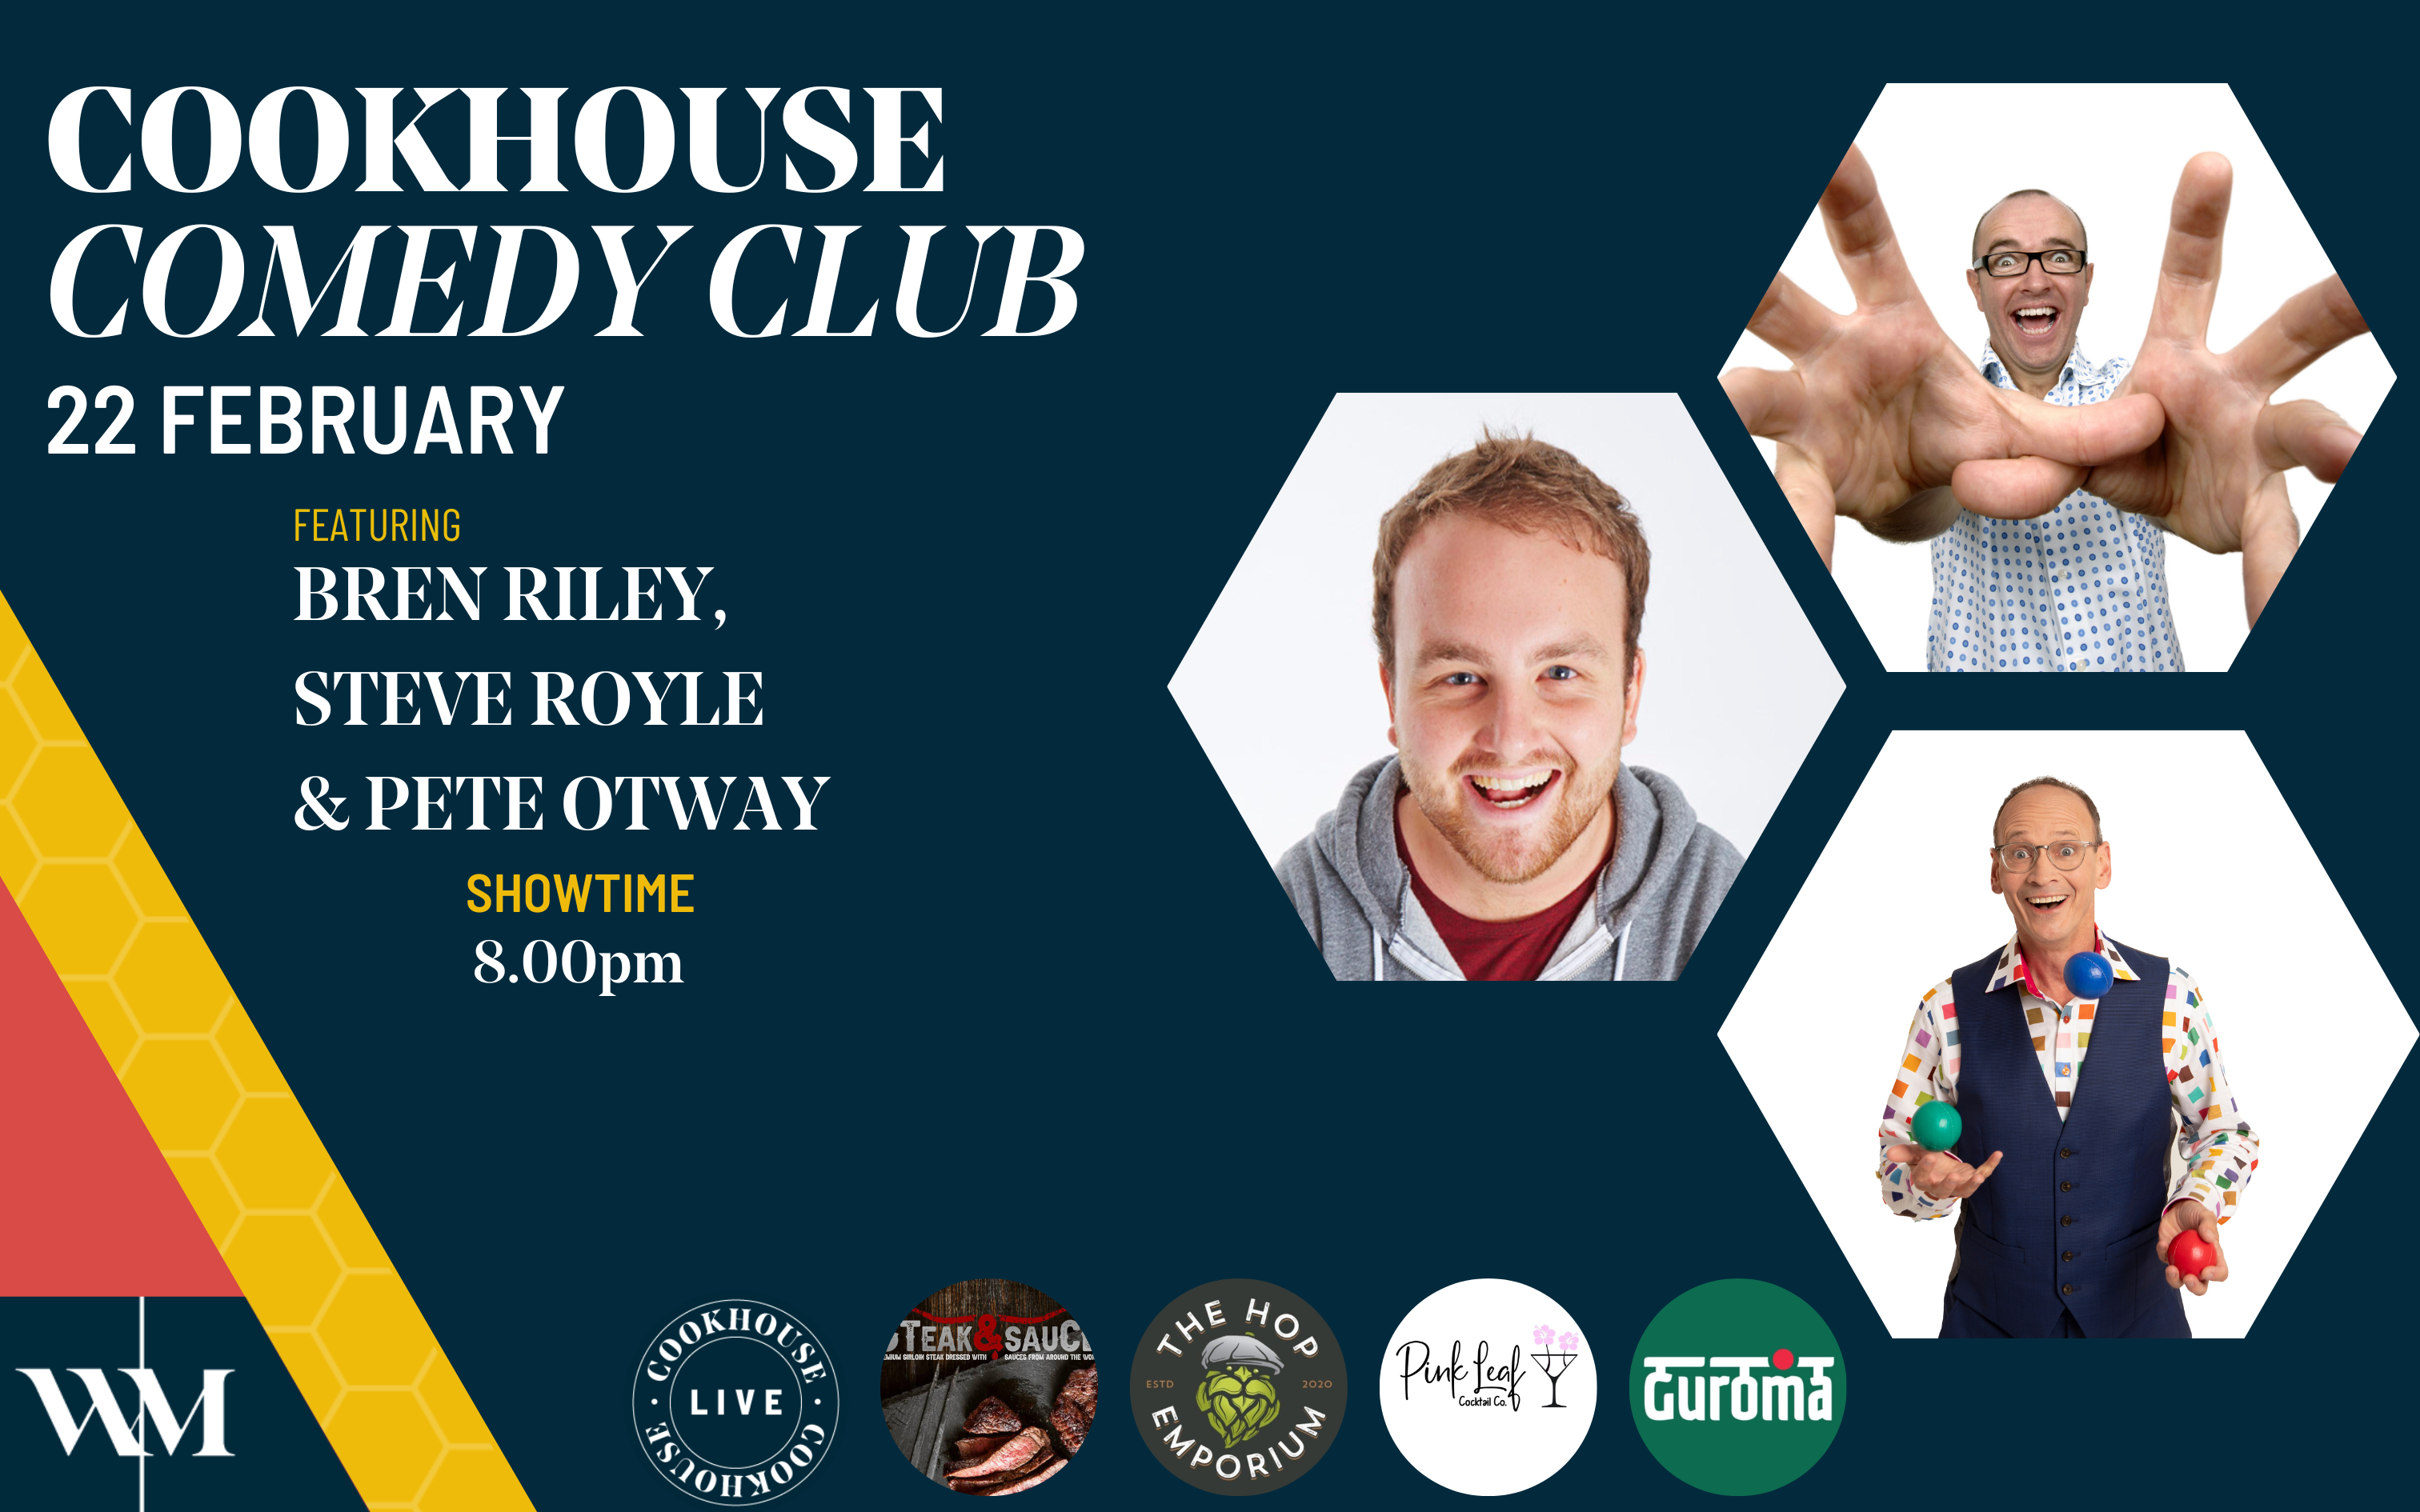 Cookhouse Comedy Club at Warrington Market